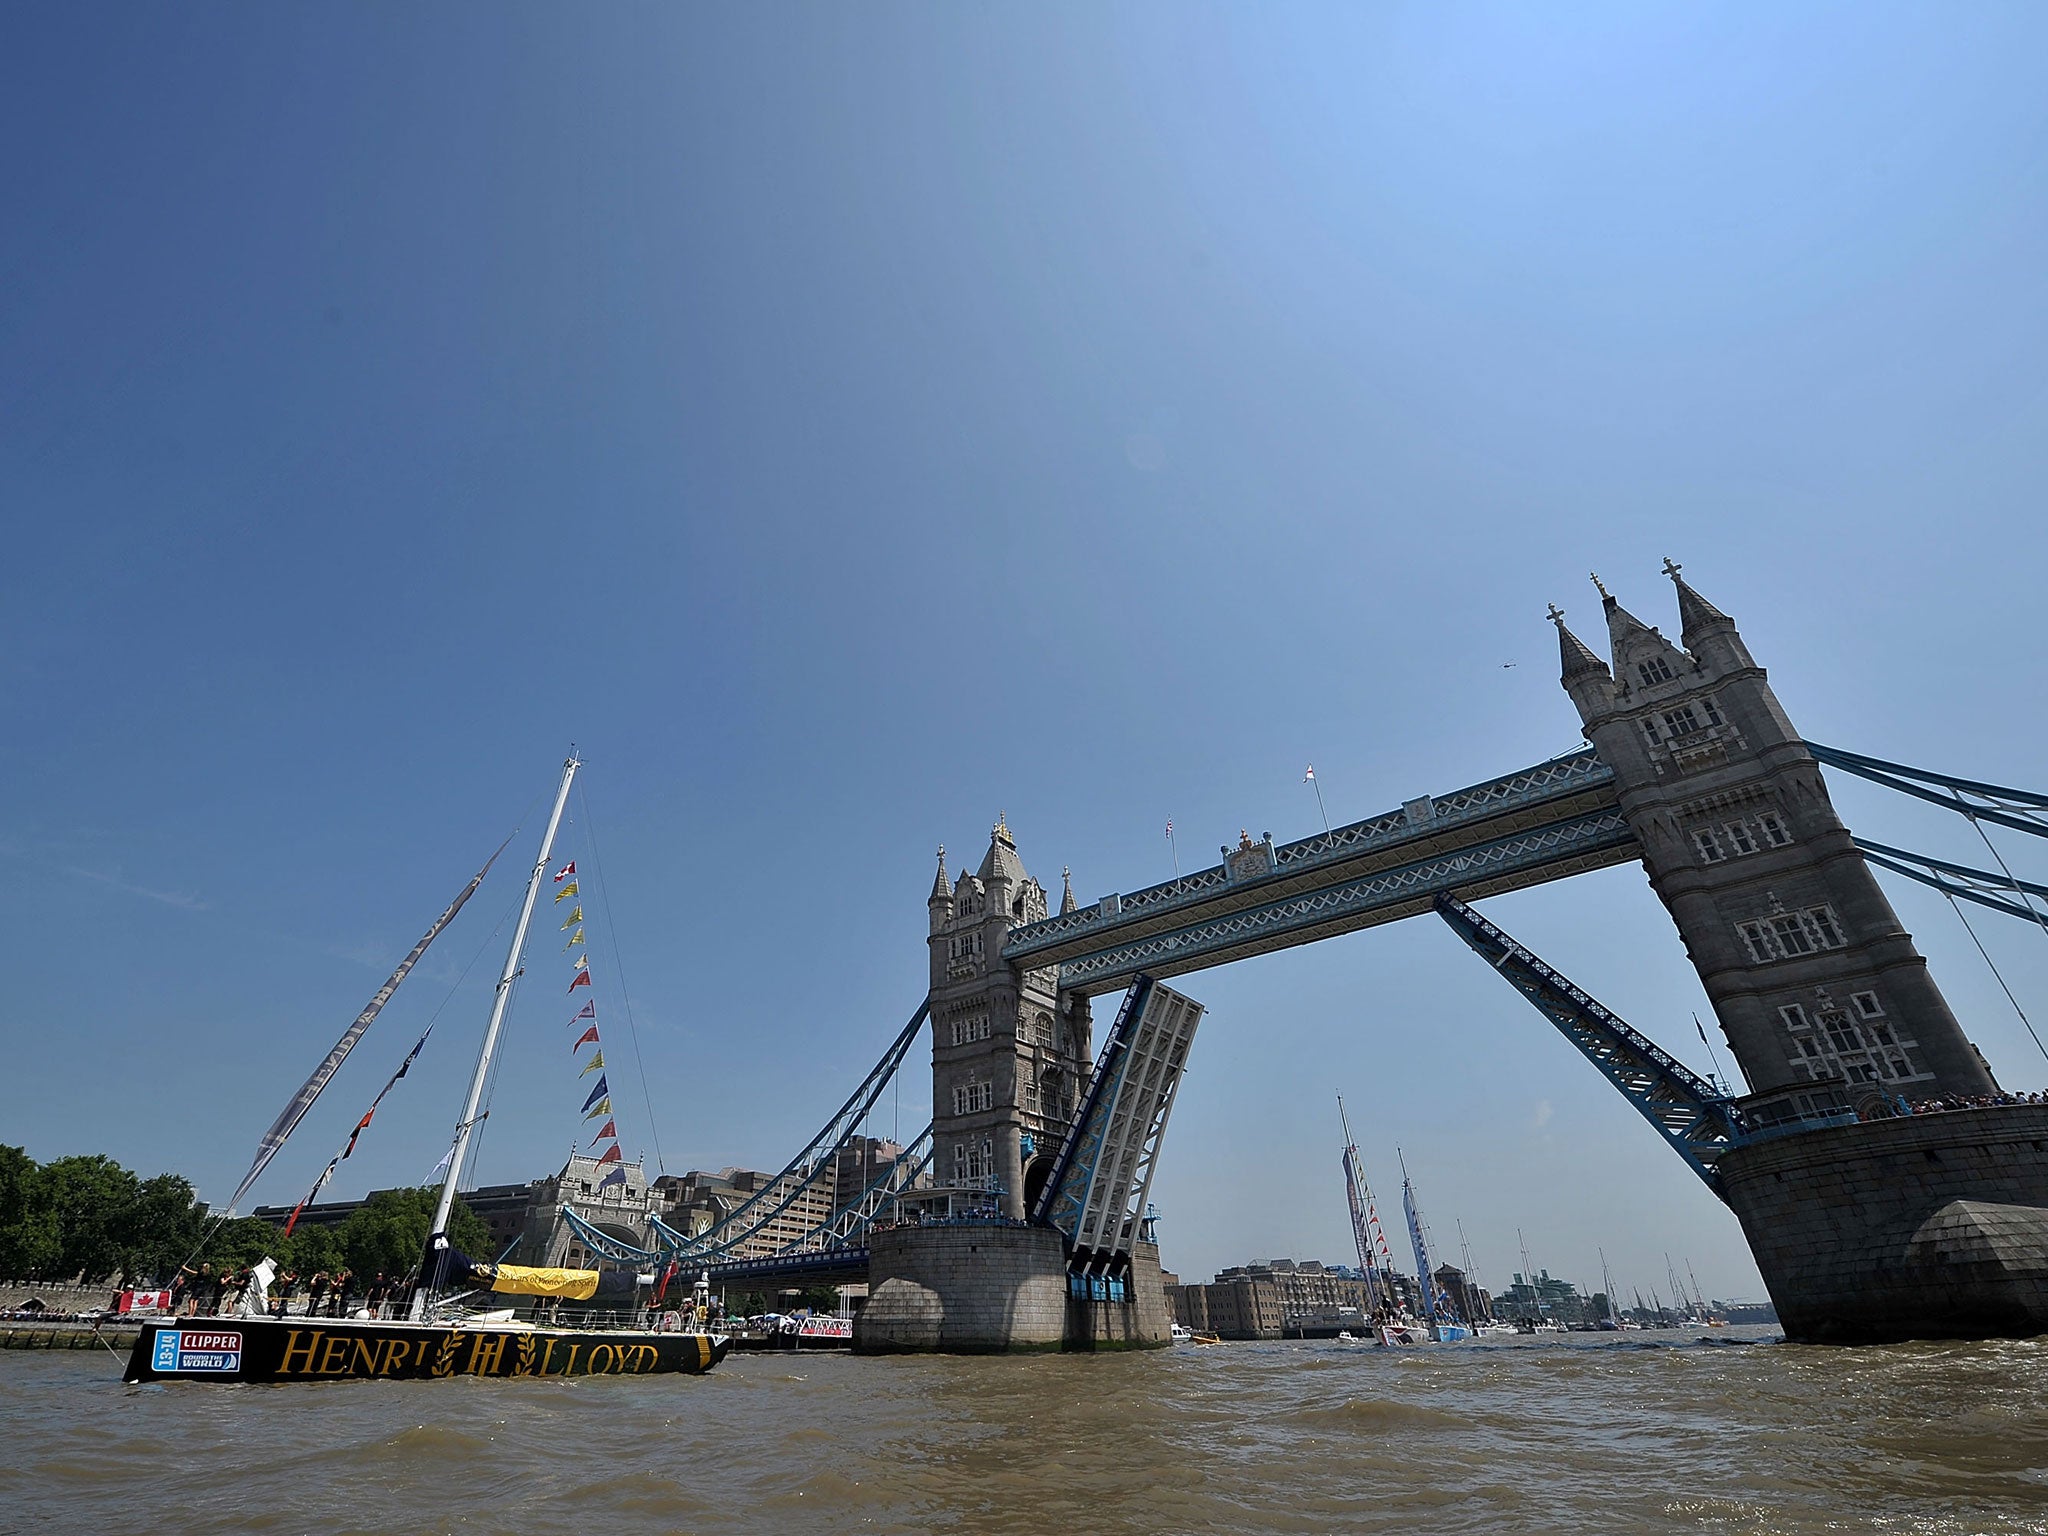 The winning Henri Lloyd Clipper Round the World yacht passes under Tower Bridge as part of a victory parade, mooring at St Katharine's dock on 12 July, 2014 in London, England